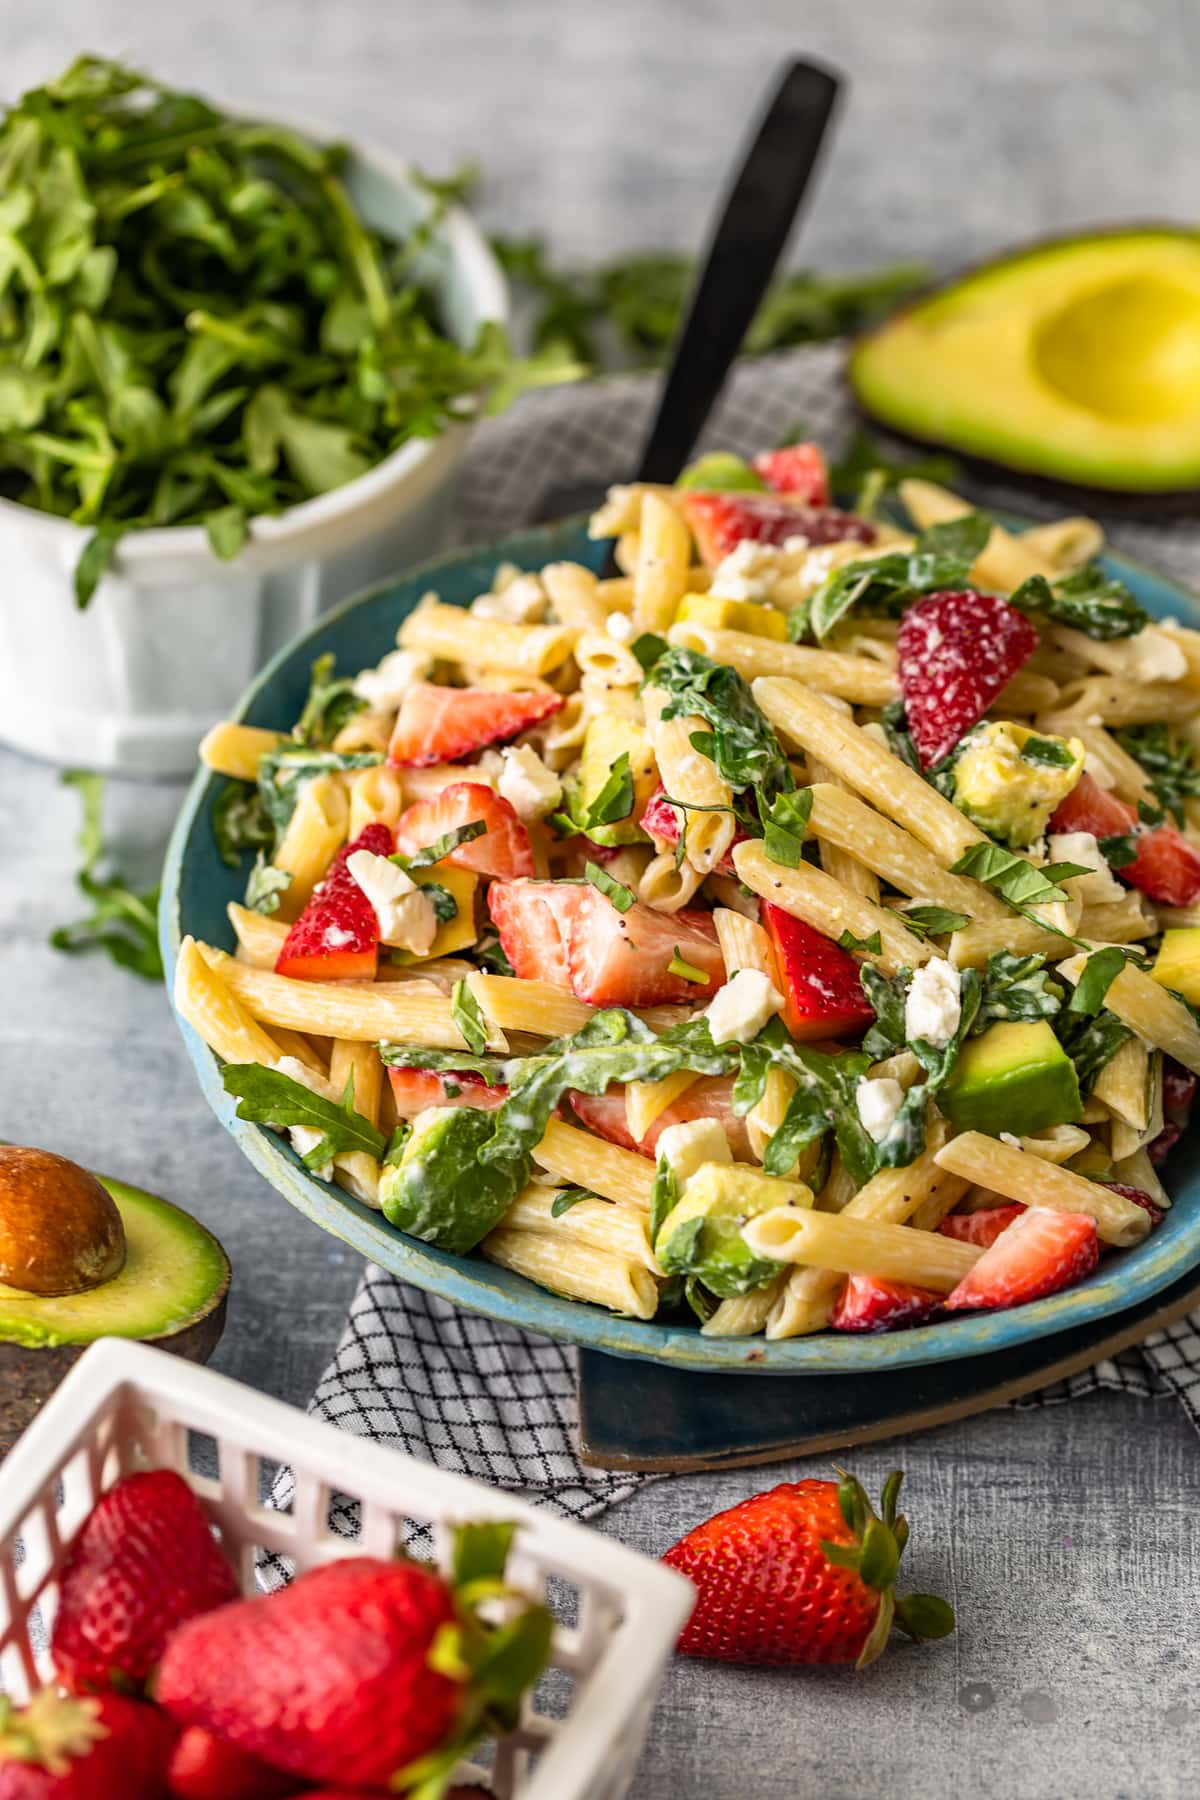 bowl of pasta salad surrounded by avocados, strawberries, and arugula